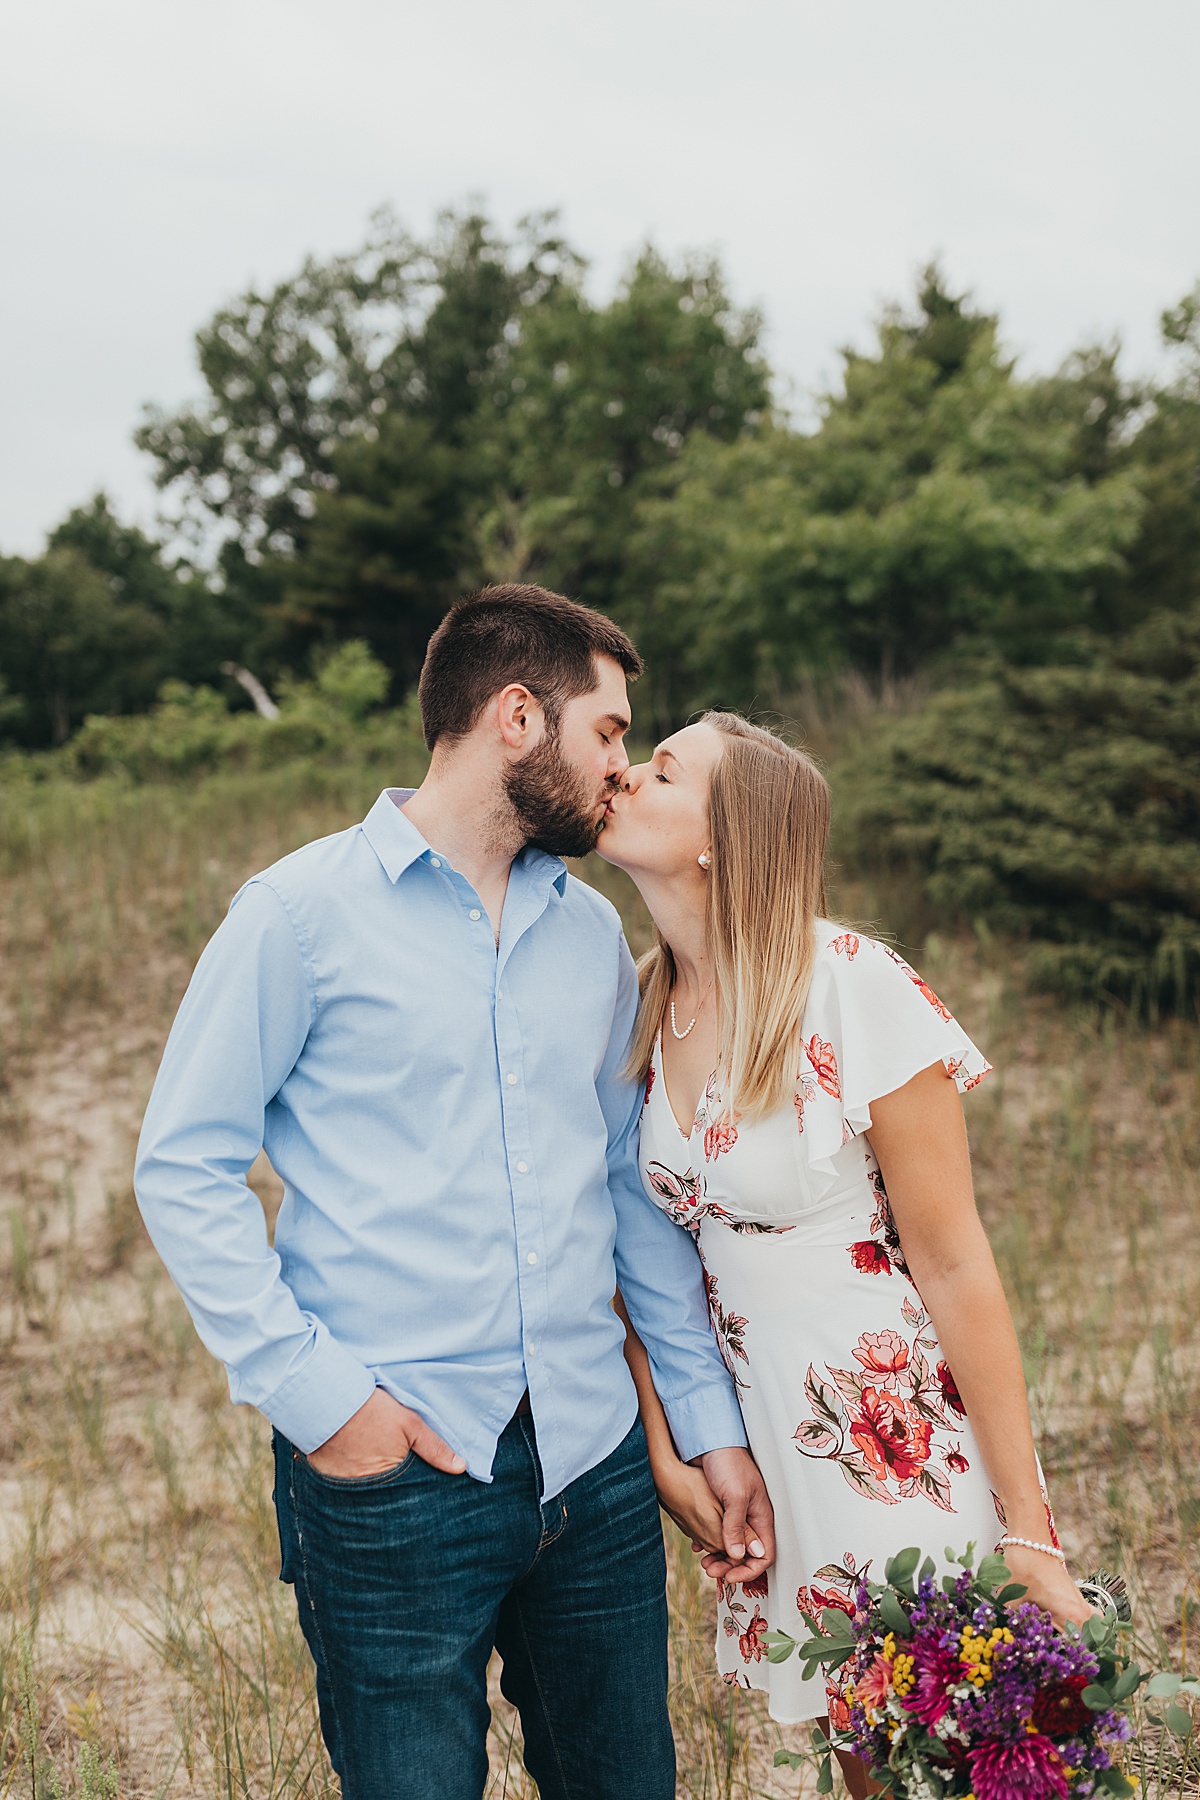 Engagement photos at Point Beach State Forest.